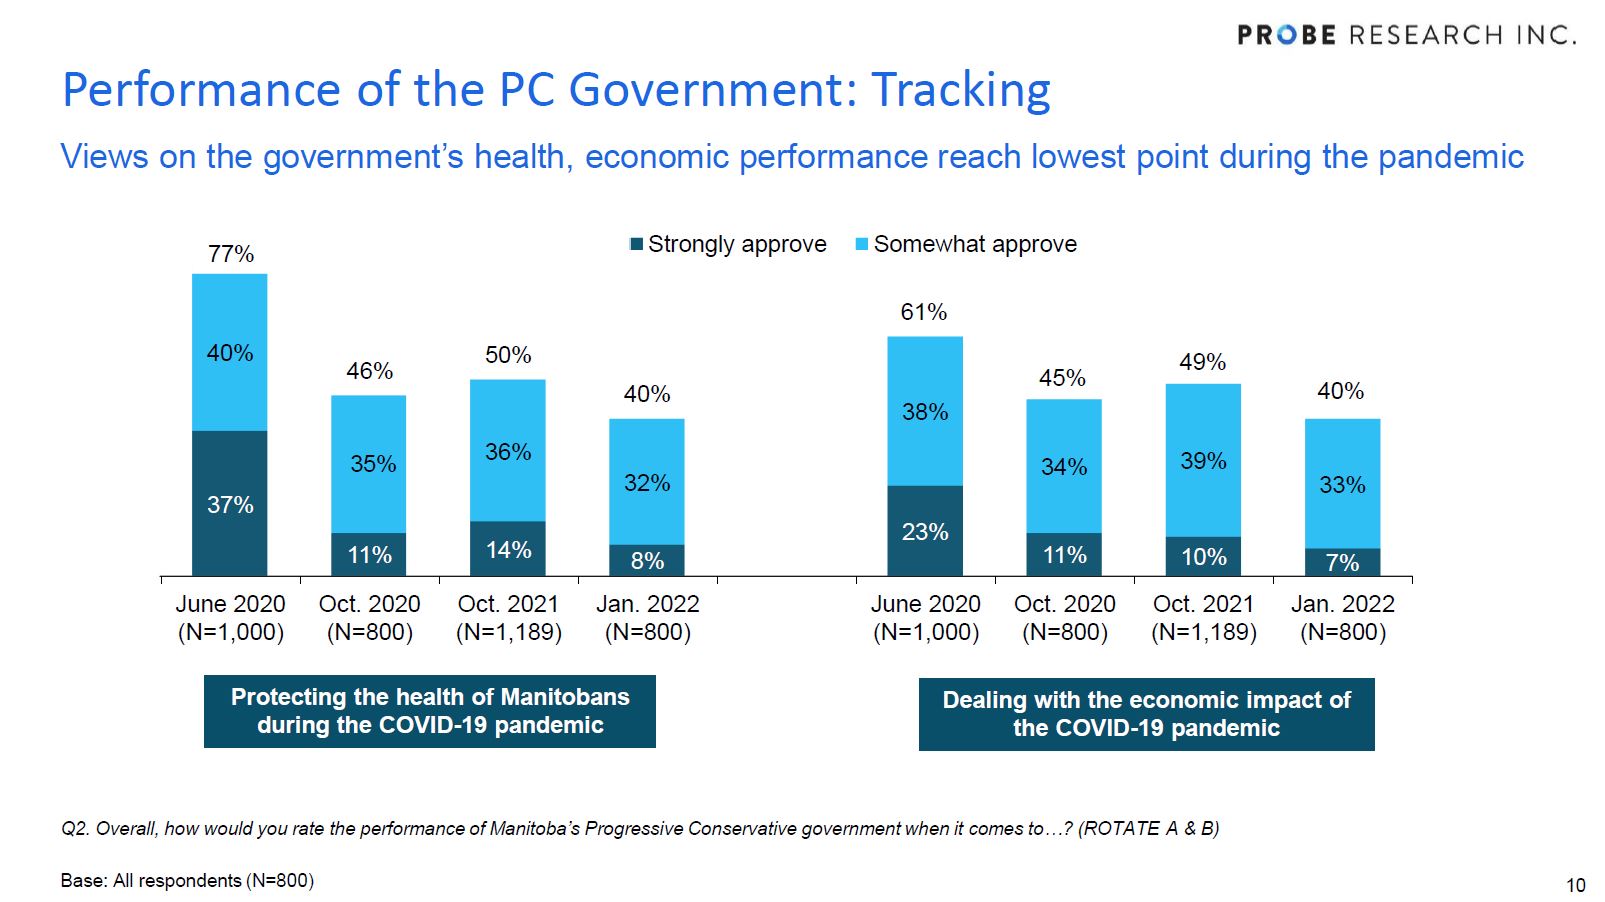 chart showing tracking views on provincial government performance re: COVID-19